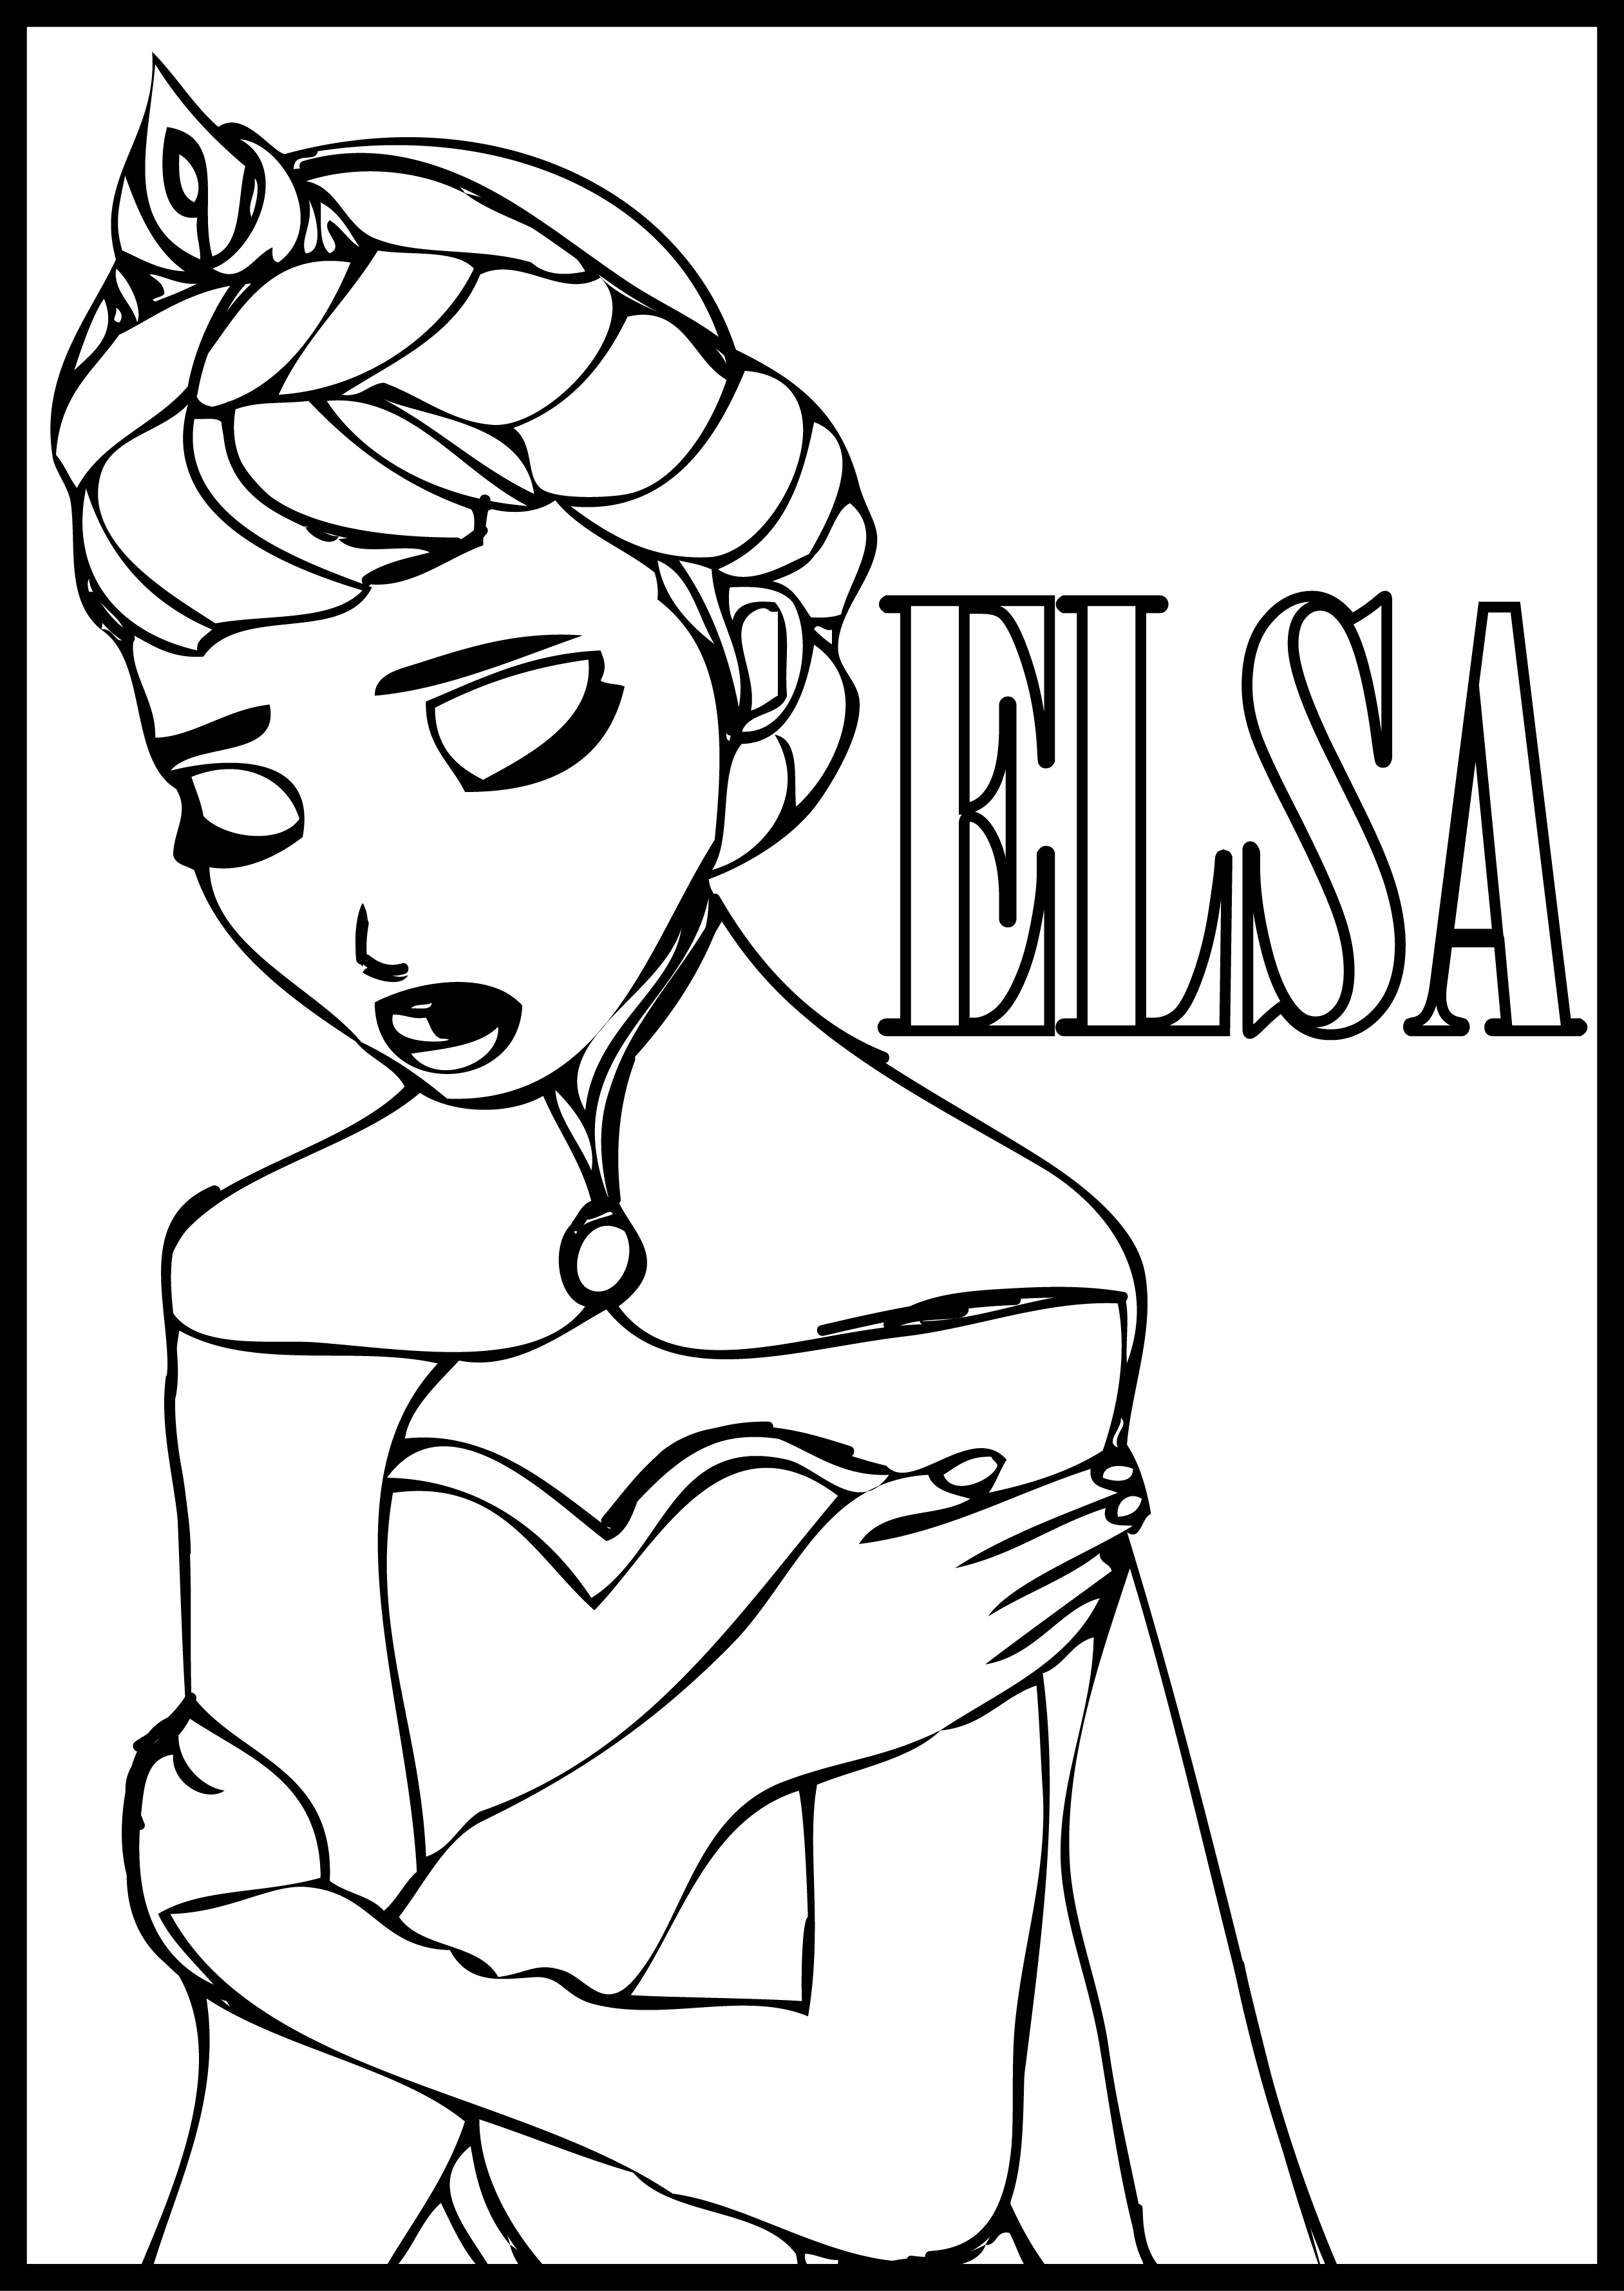 Disney Frozen Elsa Coloring Pages at Free printable